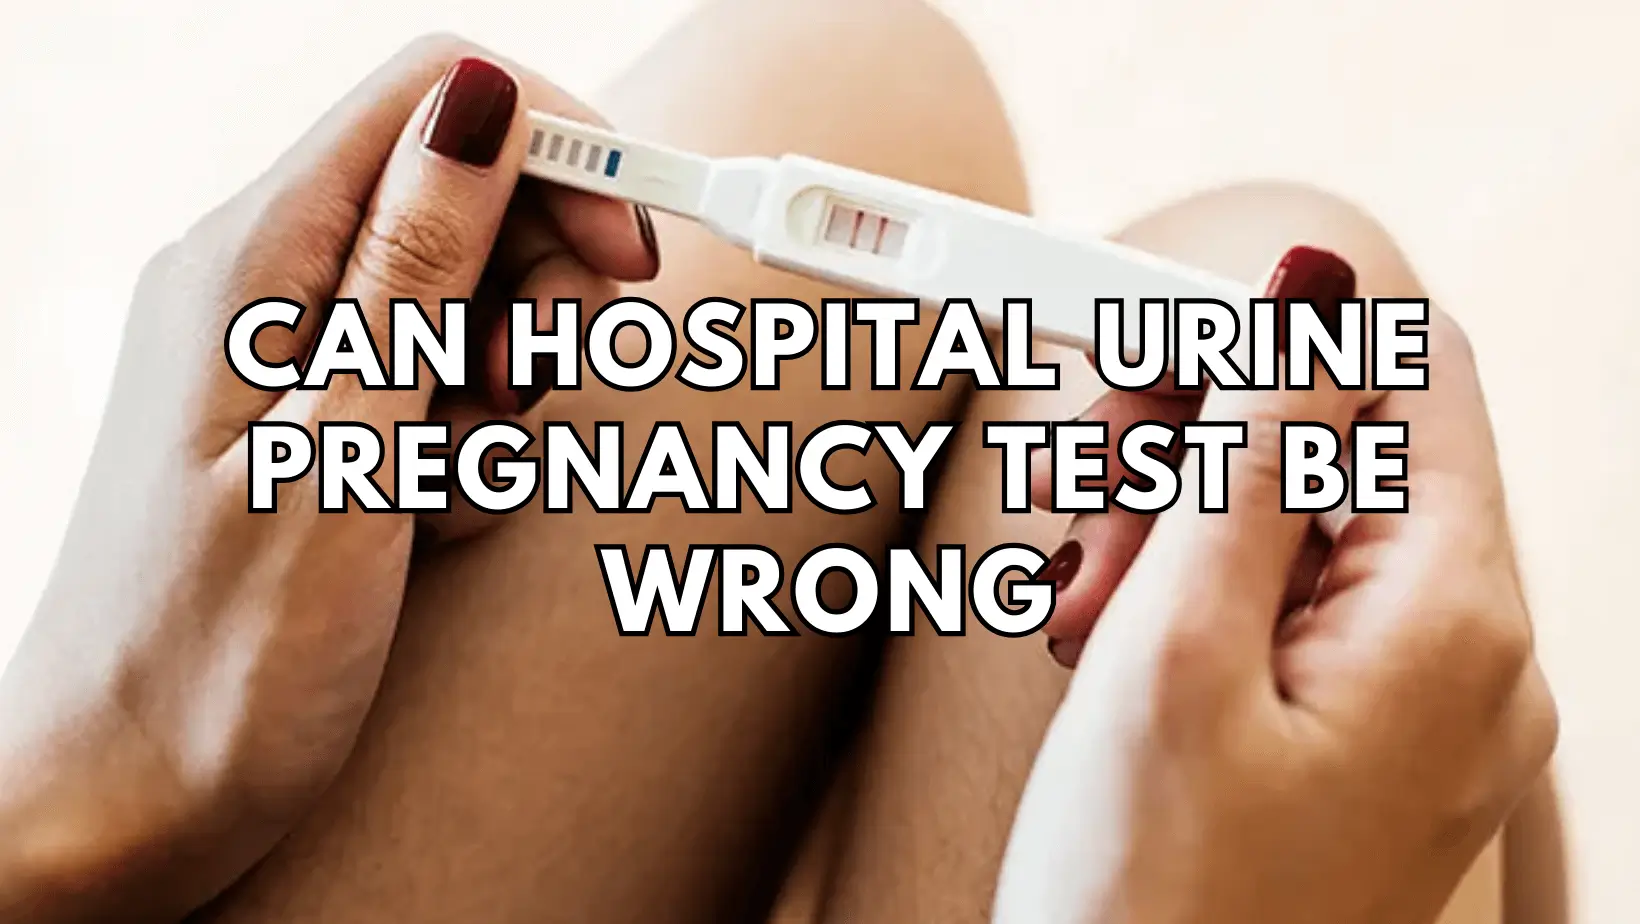 Can a Hospital Urine Pregnancy Test Provide False Results featued image